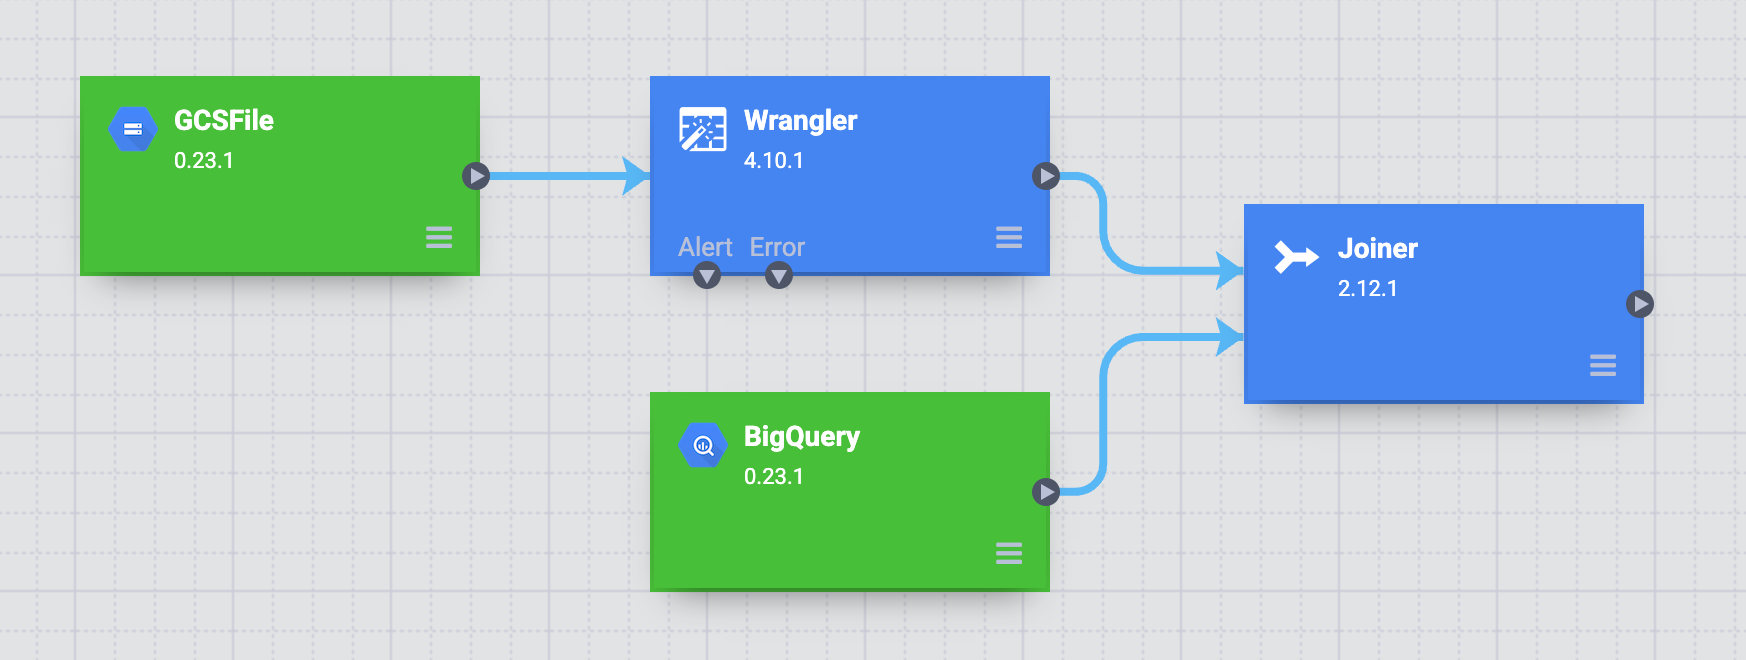 Join Wrangler and BigQuery nodes to Joiner node